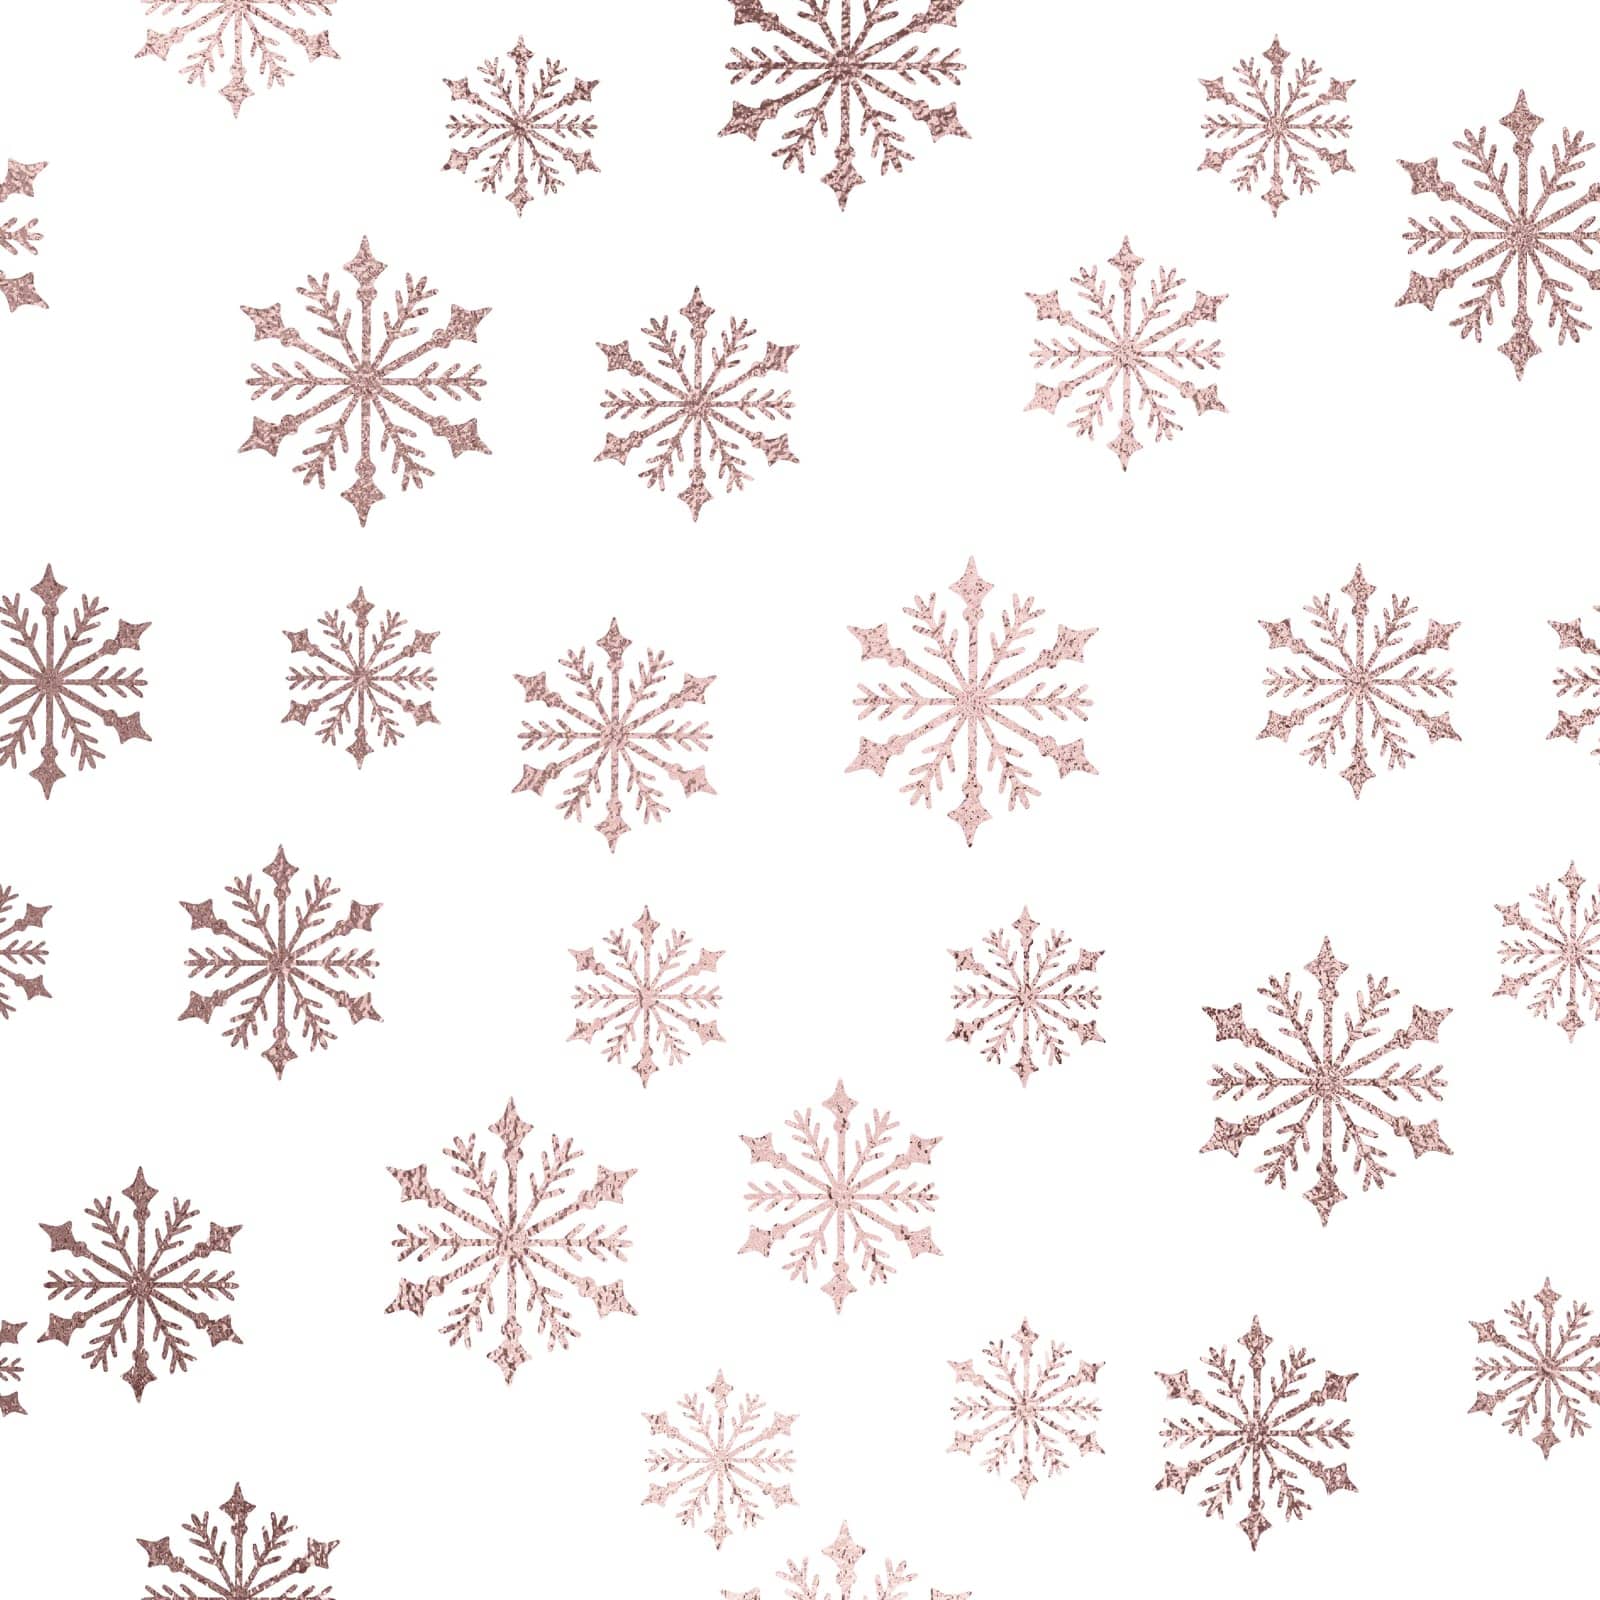 Rose golden snowflakes over layer by manudoodle